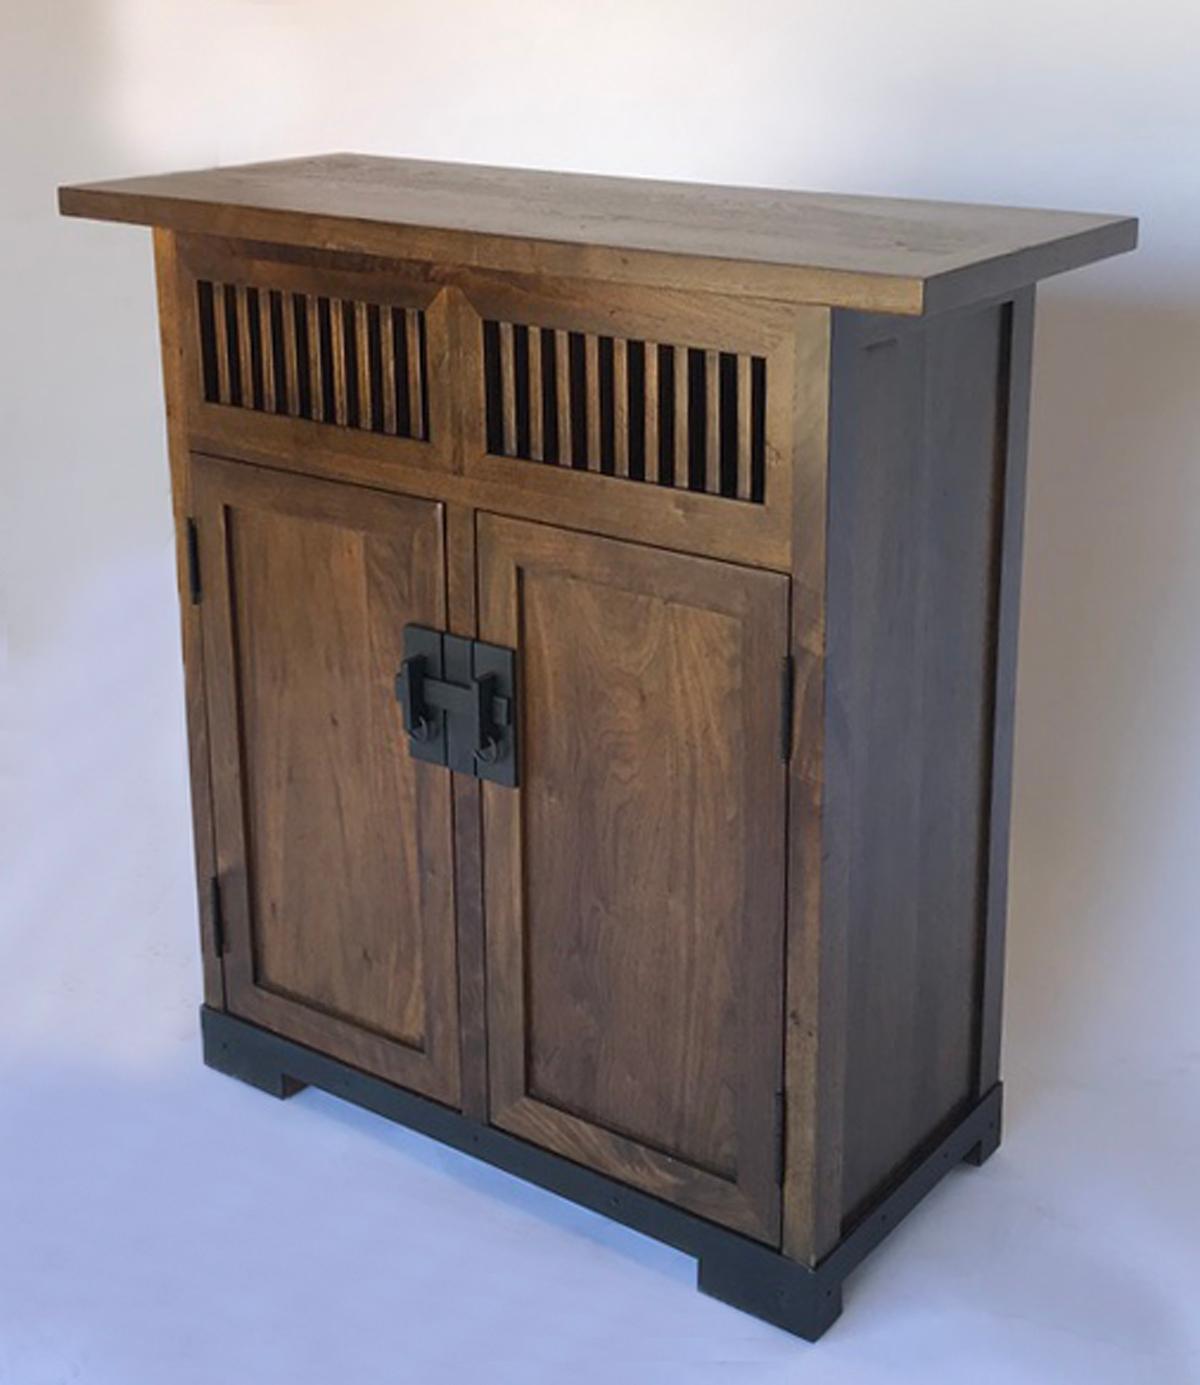 This is our custom Japanese style cabinet with iron base and hardware. Can be made in any size, in a variety of finishes. As shown in Walnut #2 with light to medium distress.
Made in Los Angeles, by Dos Gallos Studio.
CUSTOM PRICES ARE SUBJECT TO